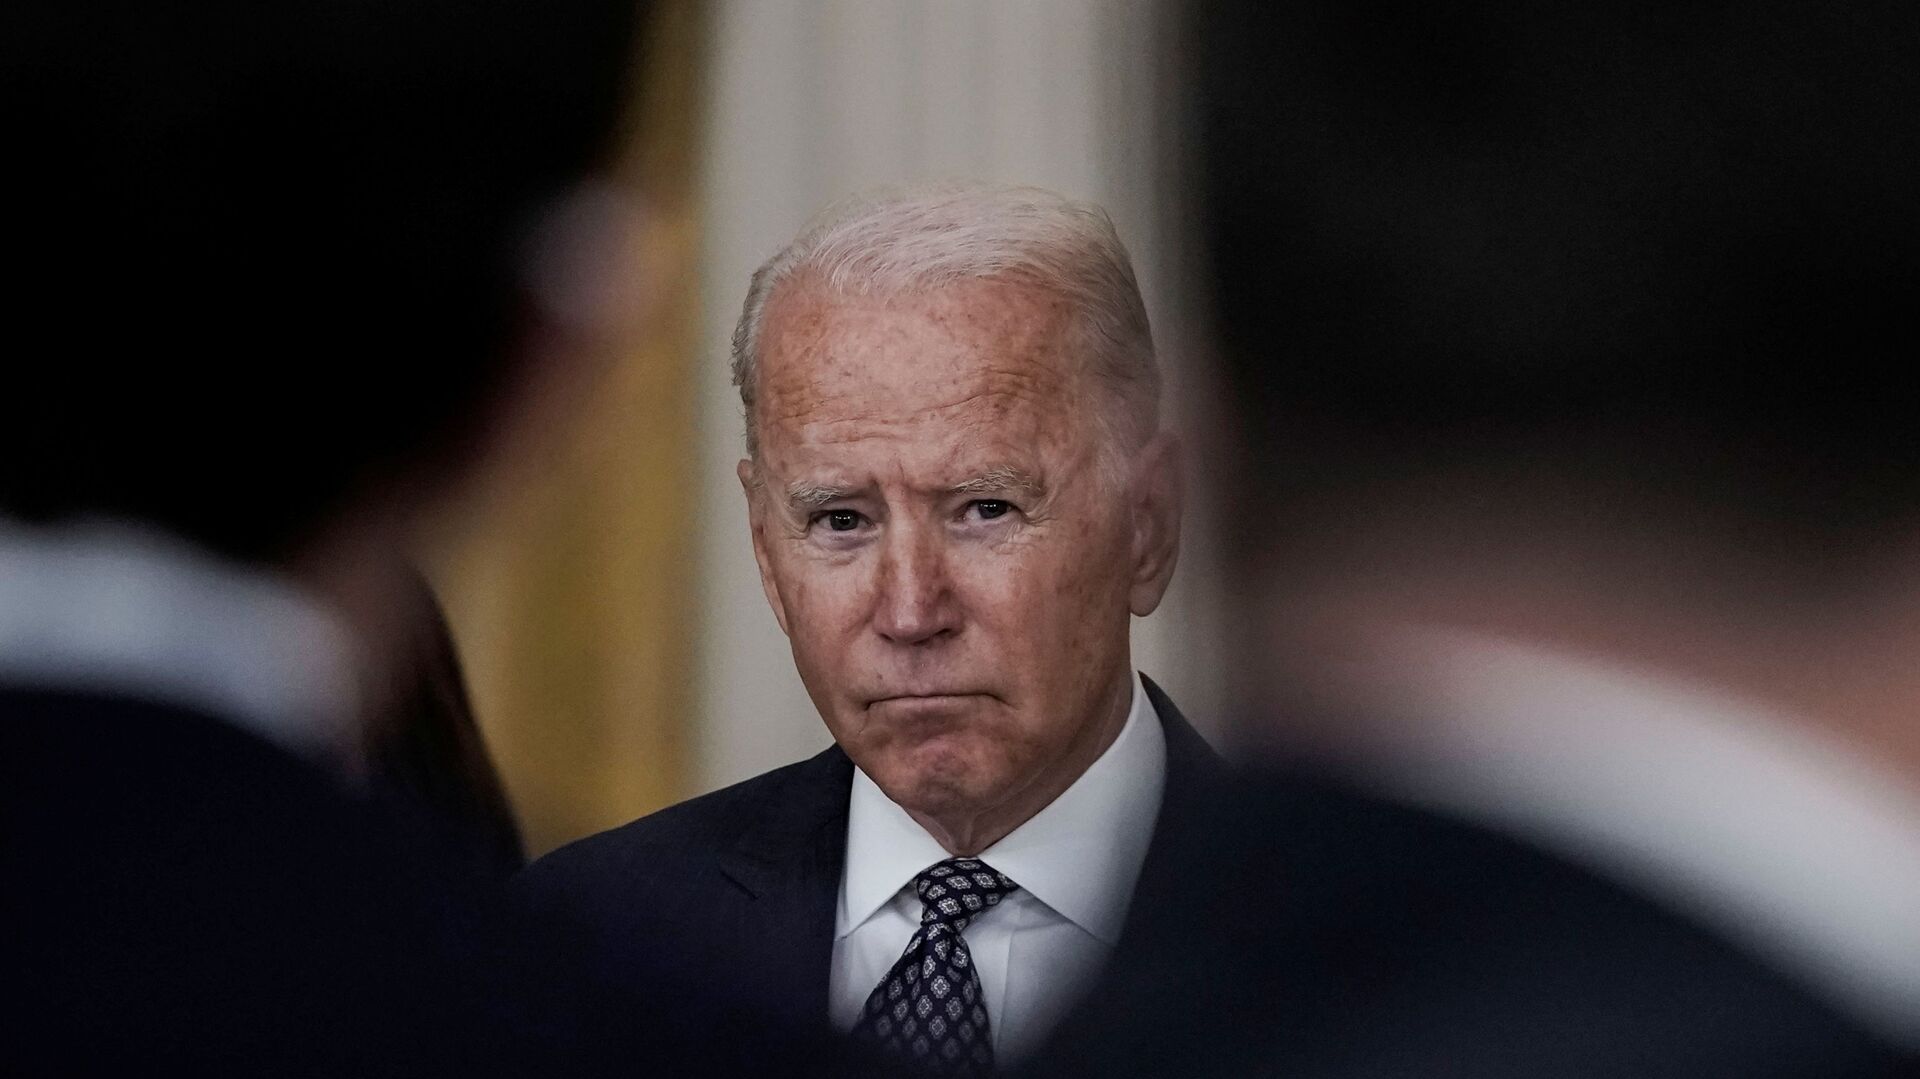 U.S.  President Joe Biden delivers remarks on evacuation efforts and the ongoing situation in Afghanistan during a speech in the East Room at the White House in Washington, U.S., August 20, 2021 - Sputnik International, 1920, 04.09.2021